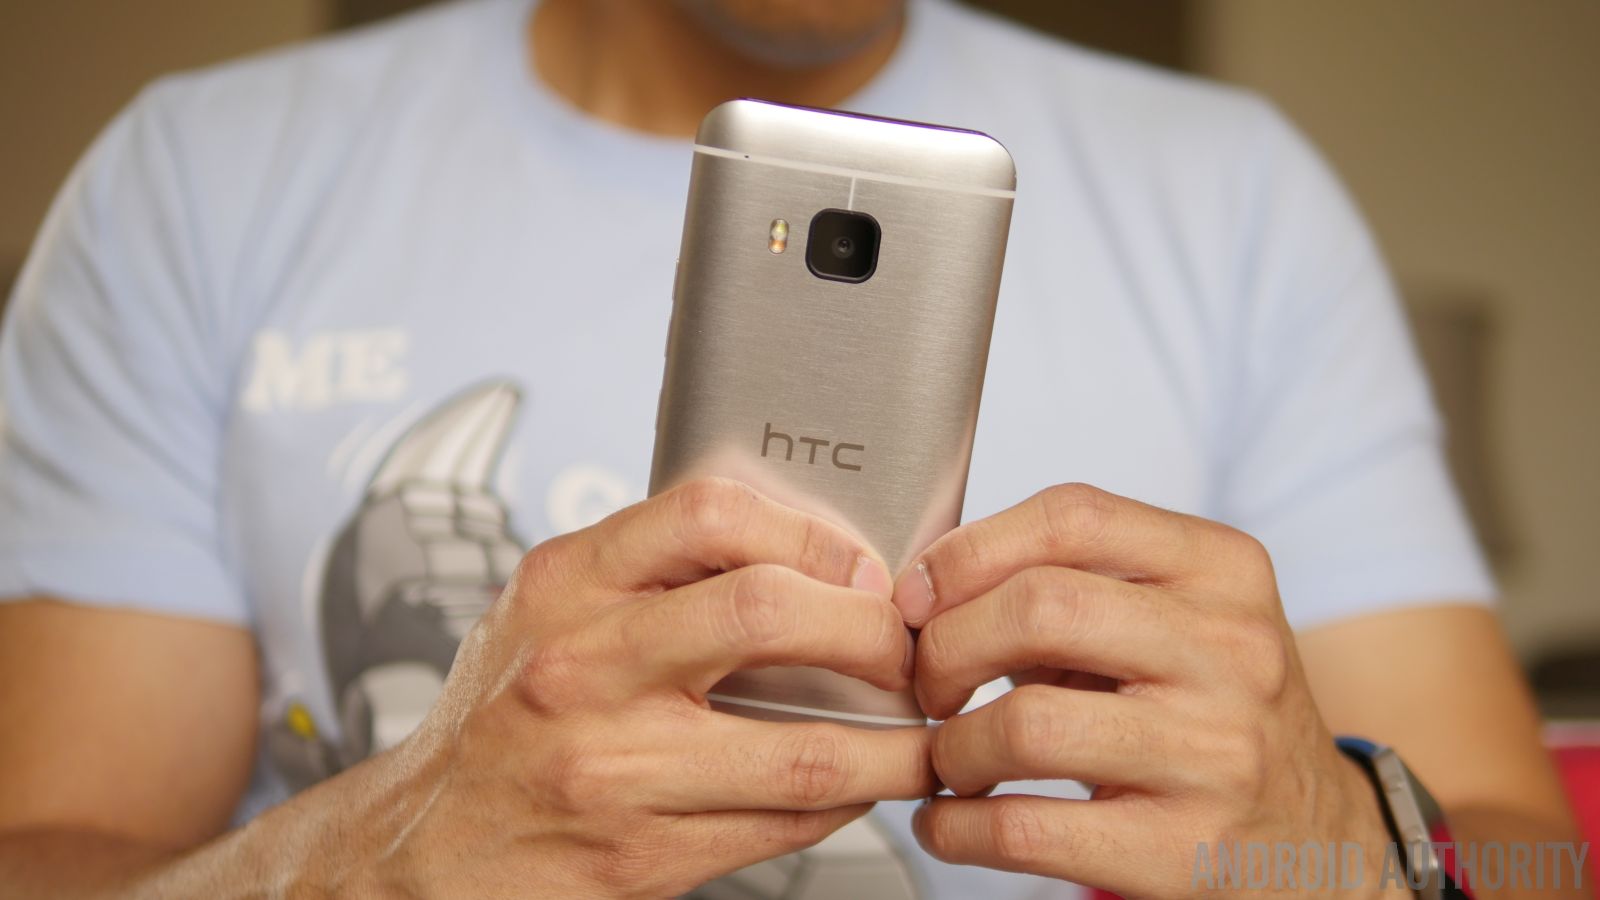 The HTC One M9.